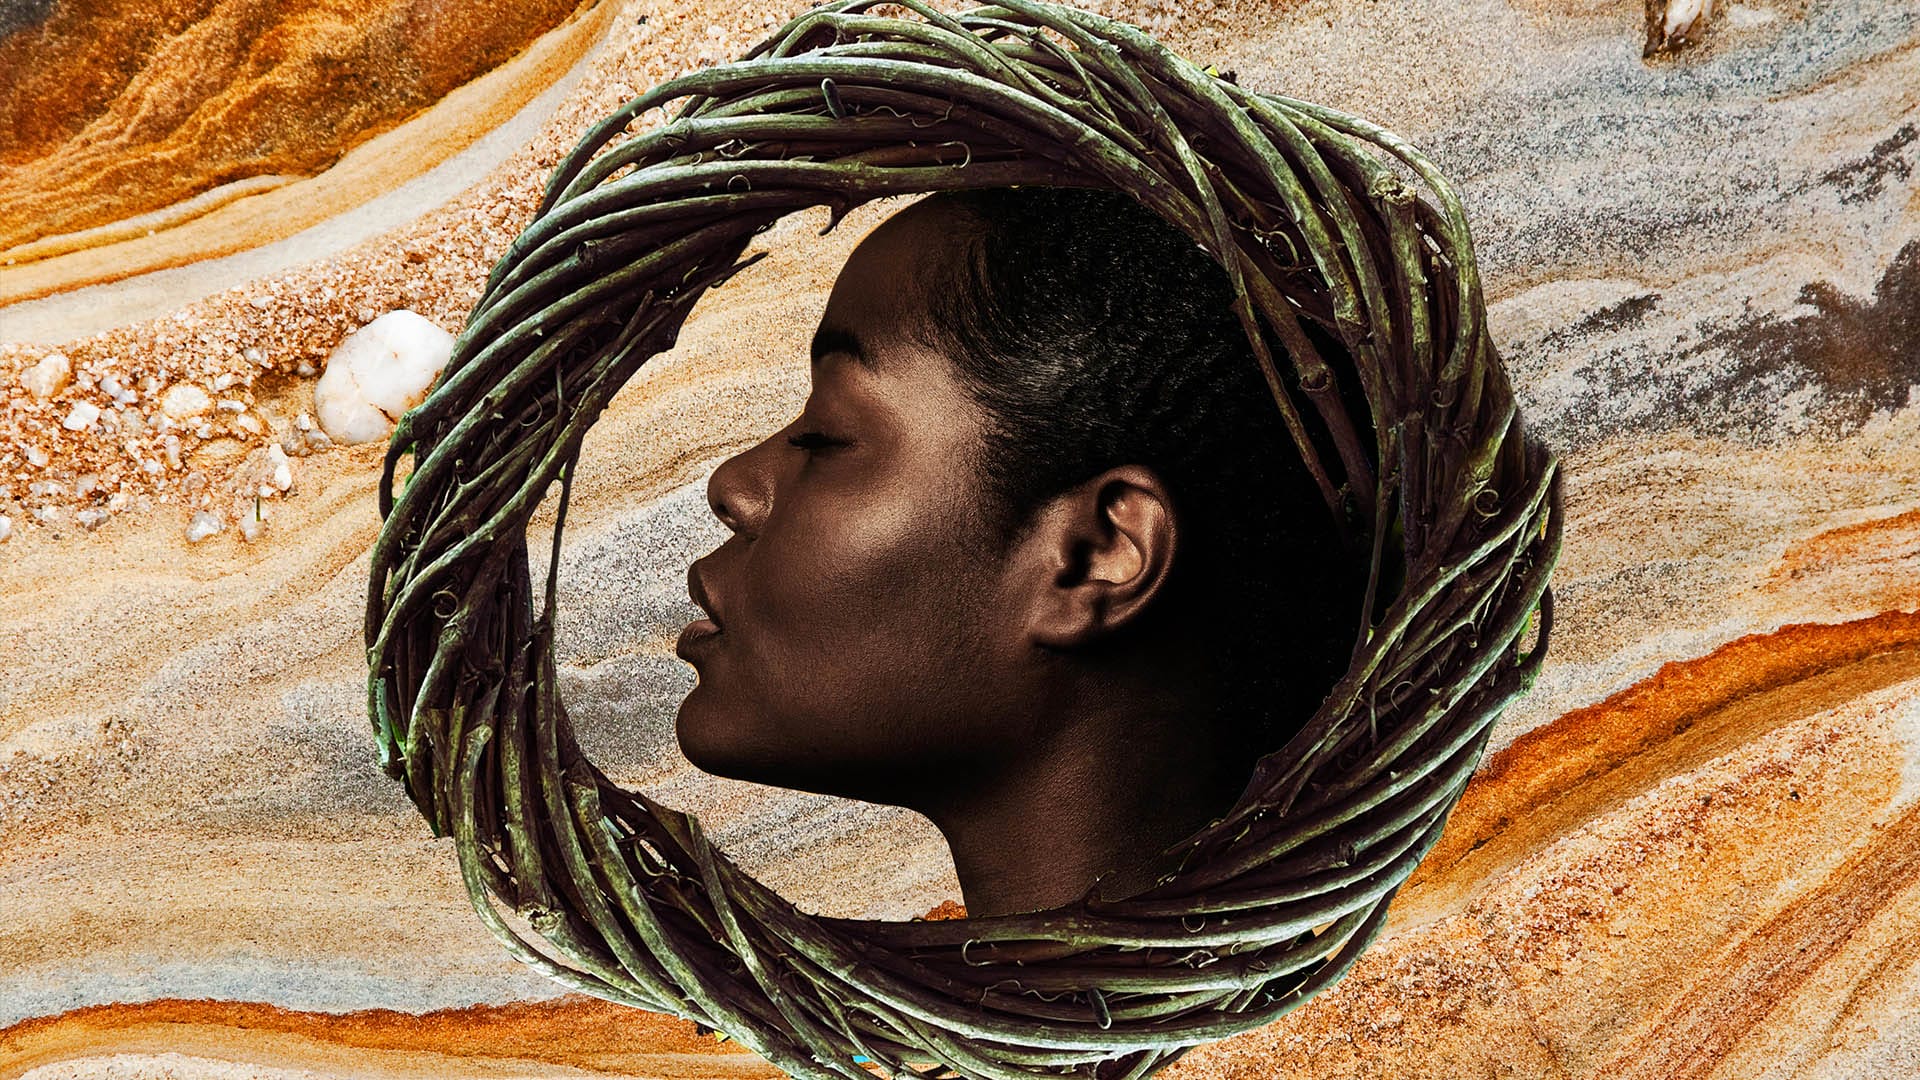 The head of a black woman in a circle of woven sticks and reeds. She has her eyes closed and her mouth slightly open, she is looking directly to the right.